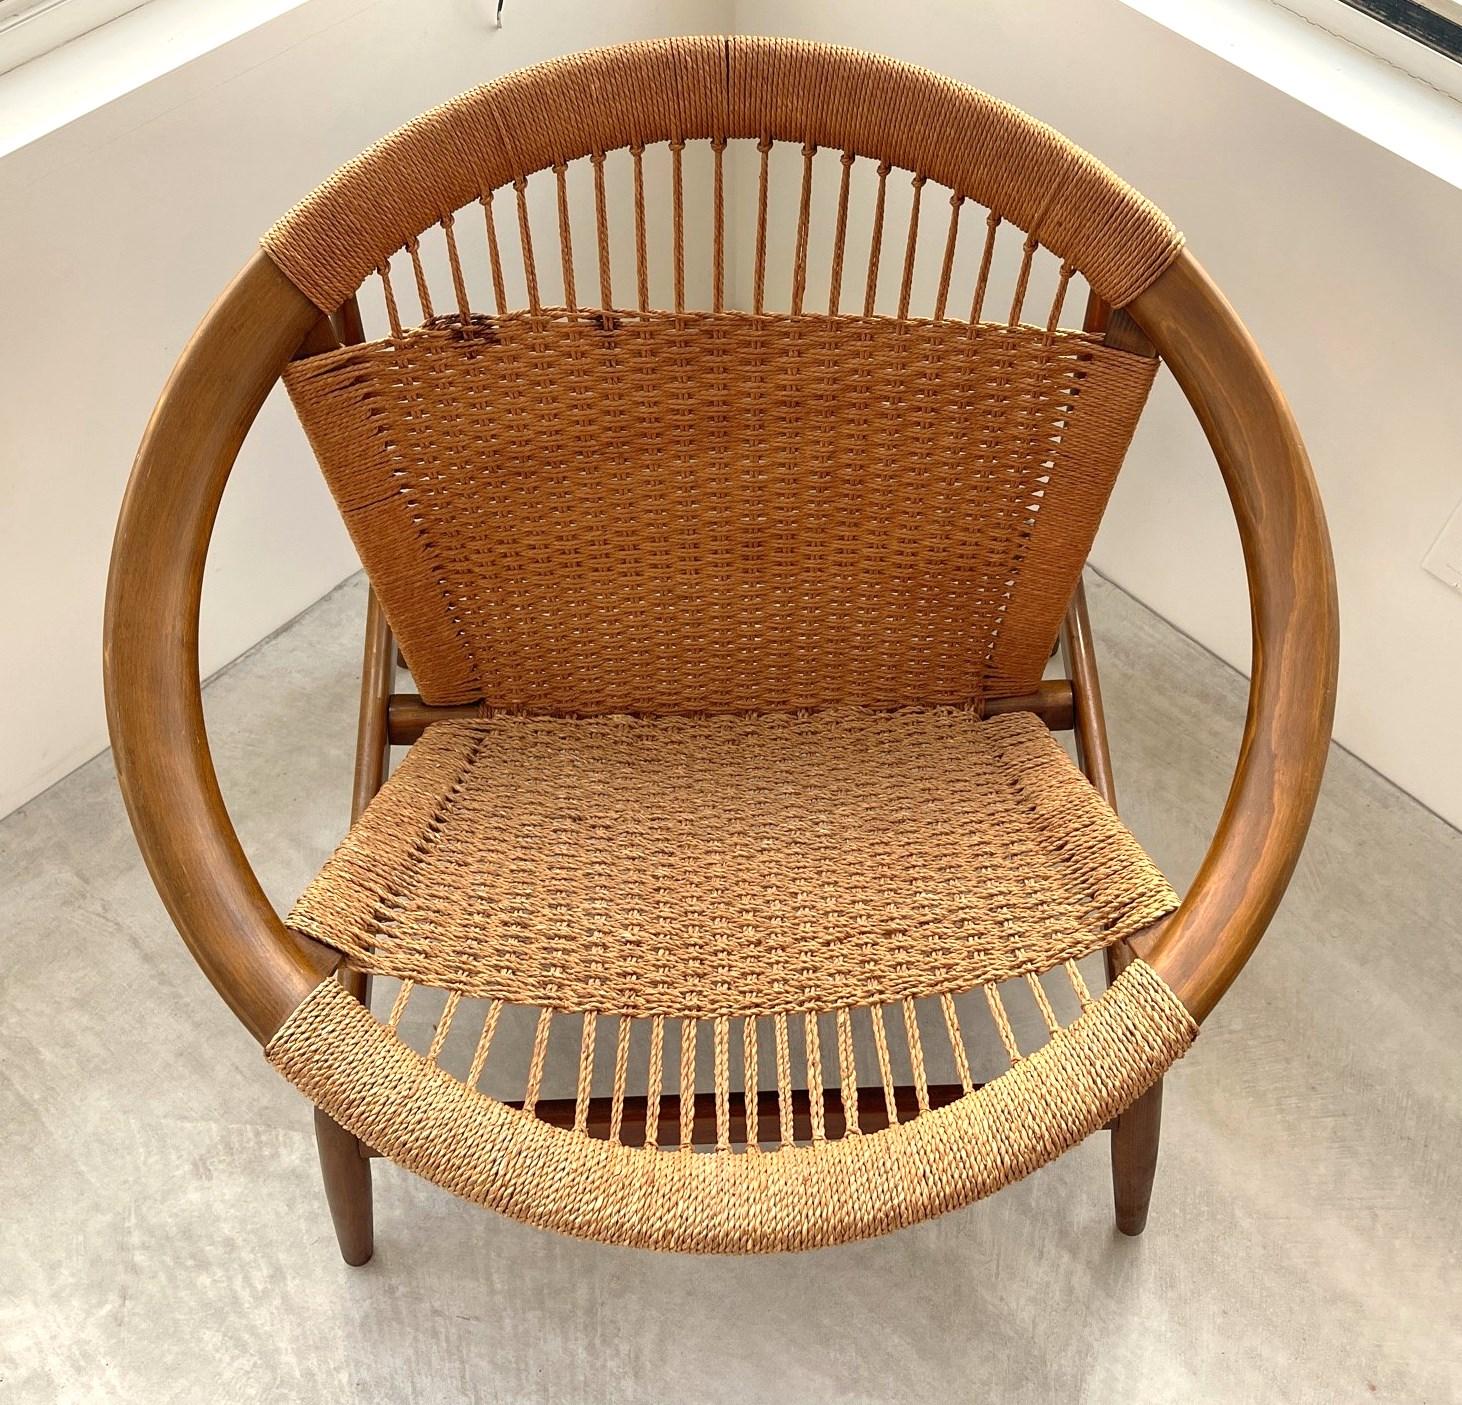 Ringstol Lounge Chair by Illum Wikkelsø, corded woven seat. All original and untouched. Some minor marks on the cording. Stunning accent chair for your home decor. 
Dimensions Height: 27 in. (68.58 cm) Width: 31.5 in. (80.01 cm) Depth: 29 in.